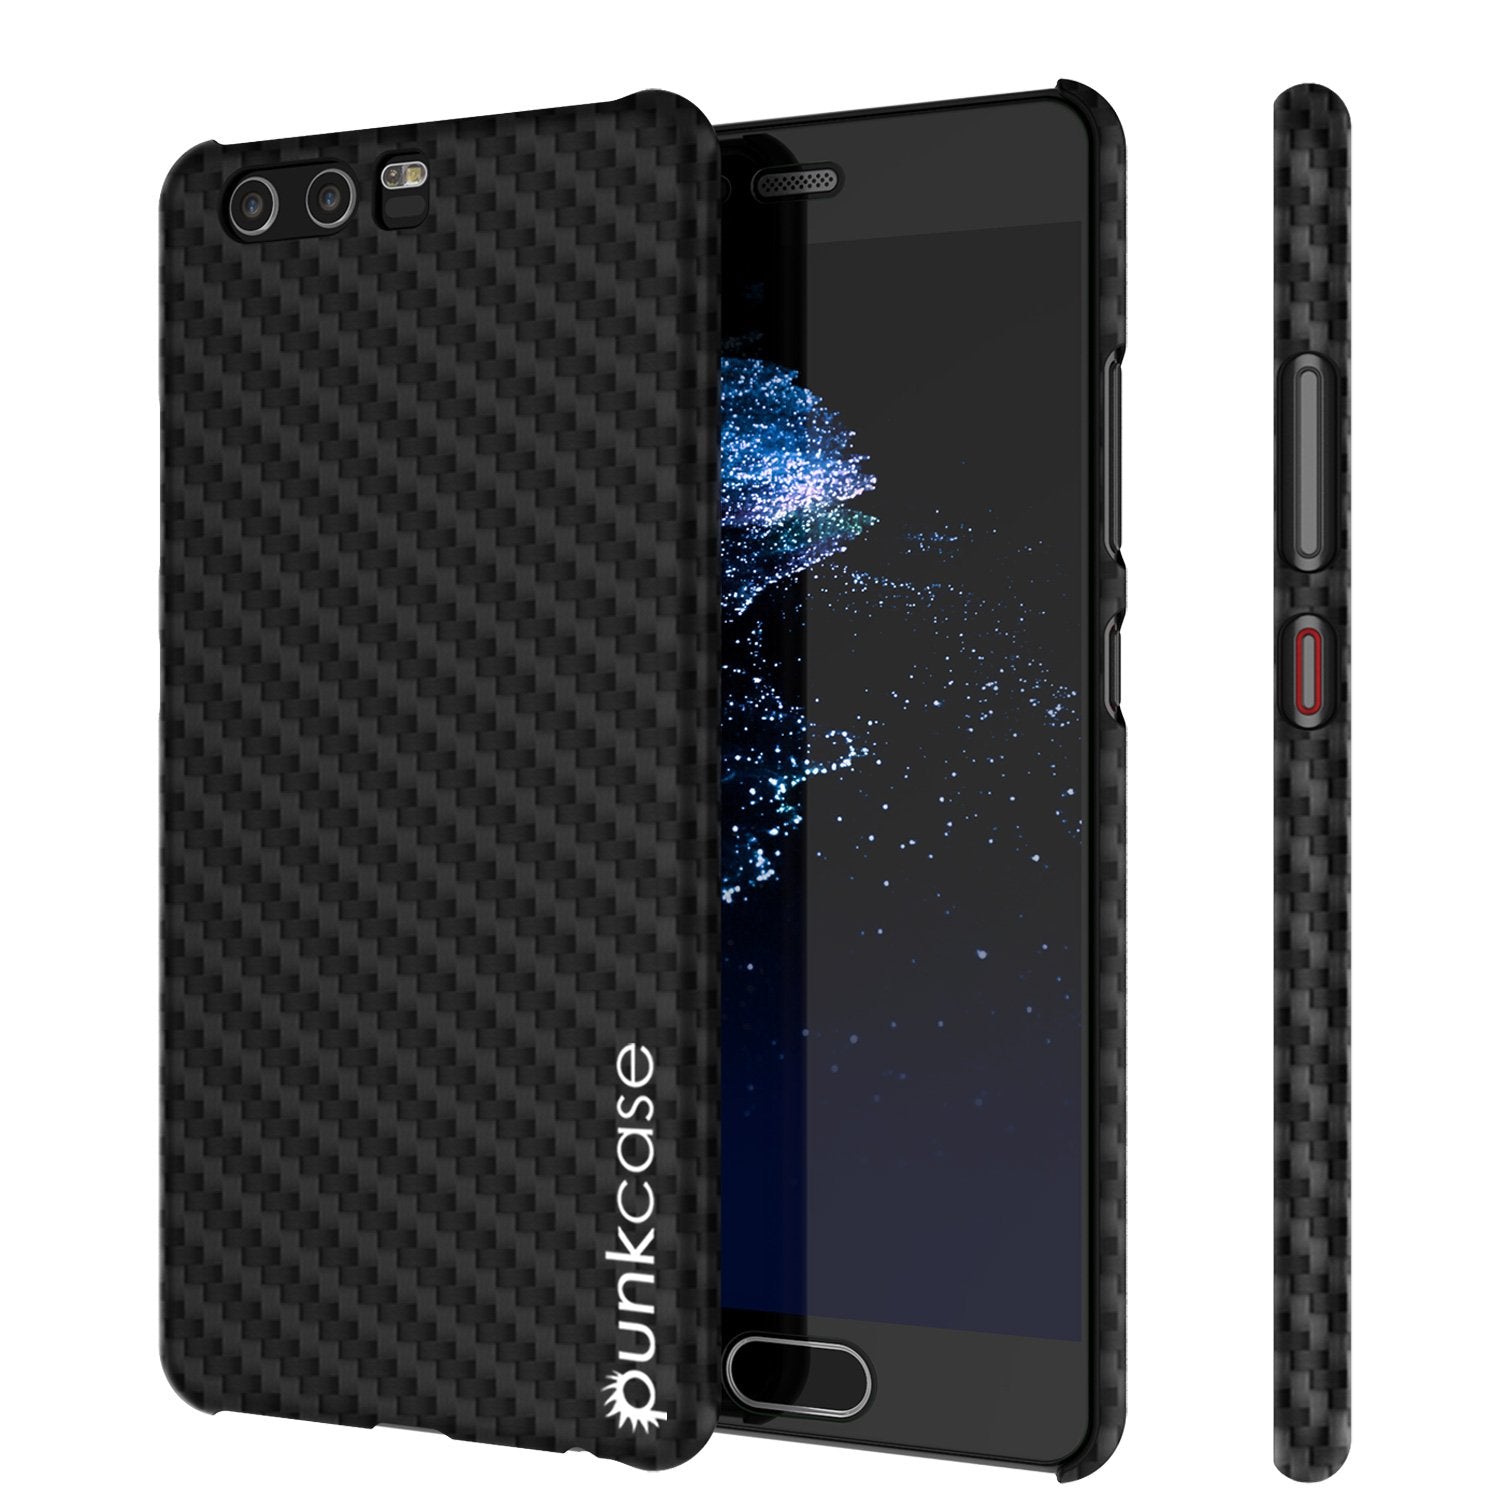 Huawei P10 Case, Punkcase CarbonShield, Heavy Duty & Ultra Thin 2 Piece Dual Layer PU Leather Cover [shockproof] [non slip] with Tempered Glass Screen Protector for Huawei P10 [Jet Black] - PunkCase NZ